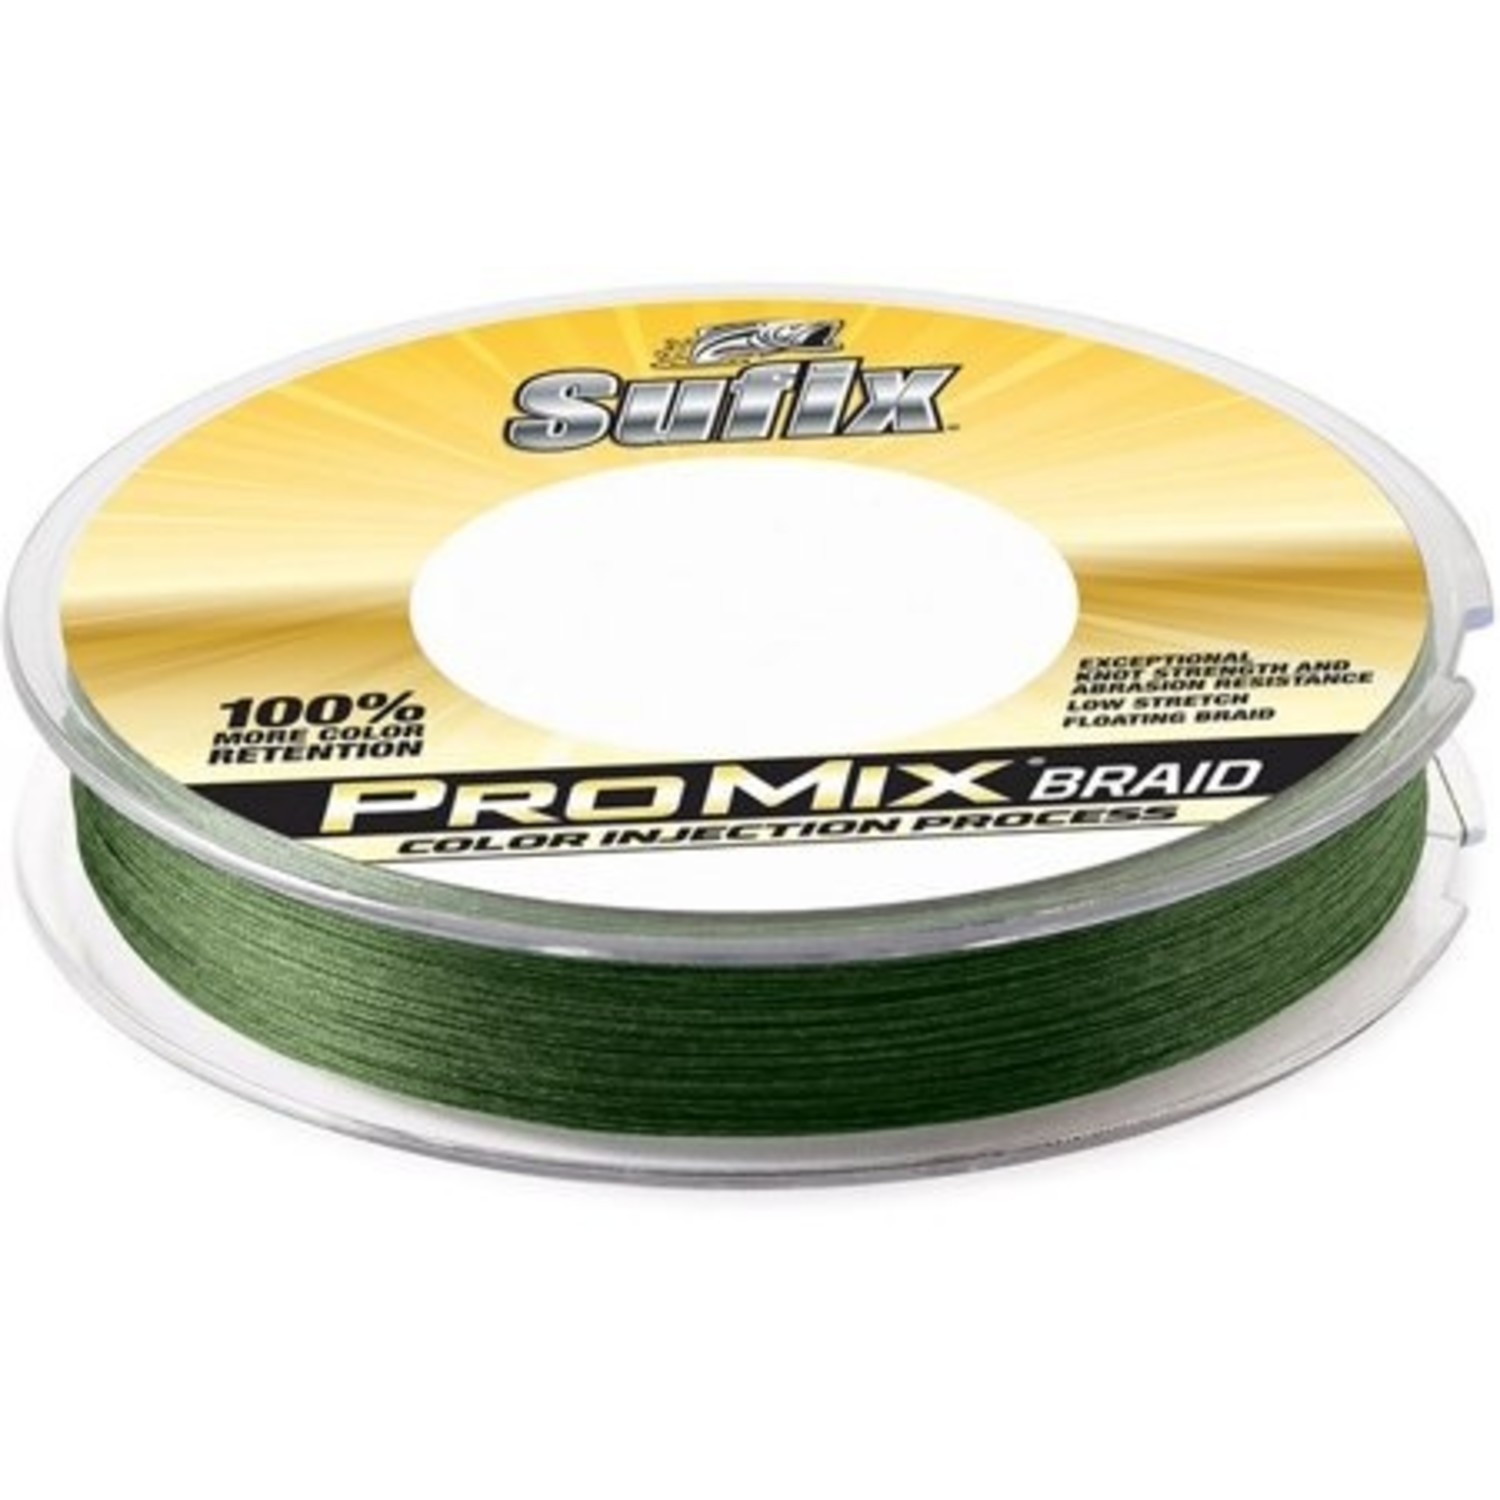 Rapala promix braid 20lb lo-vis green - OutfitterSSM